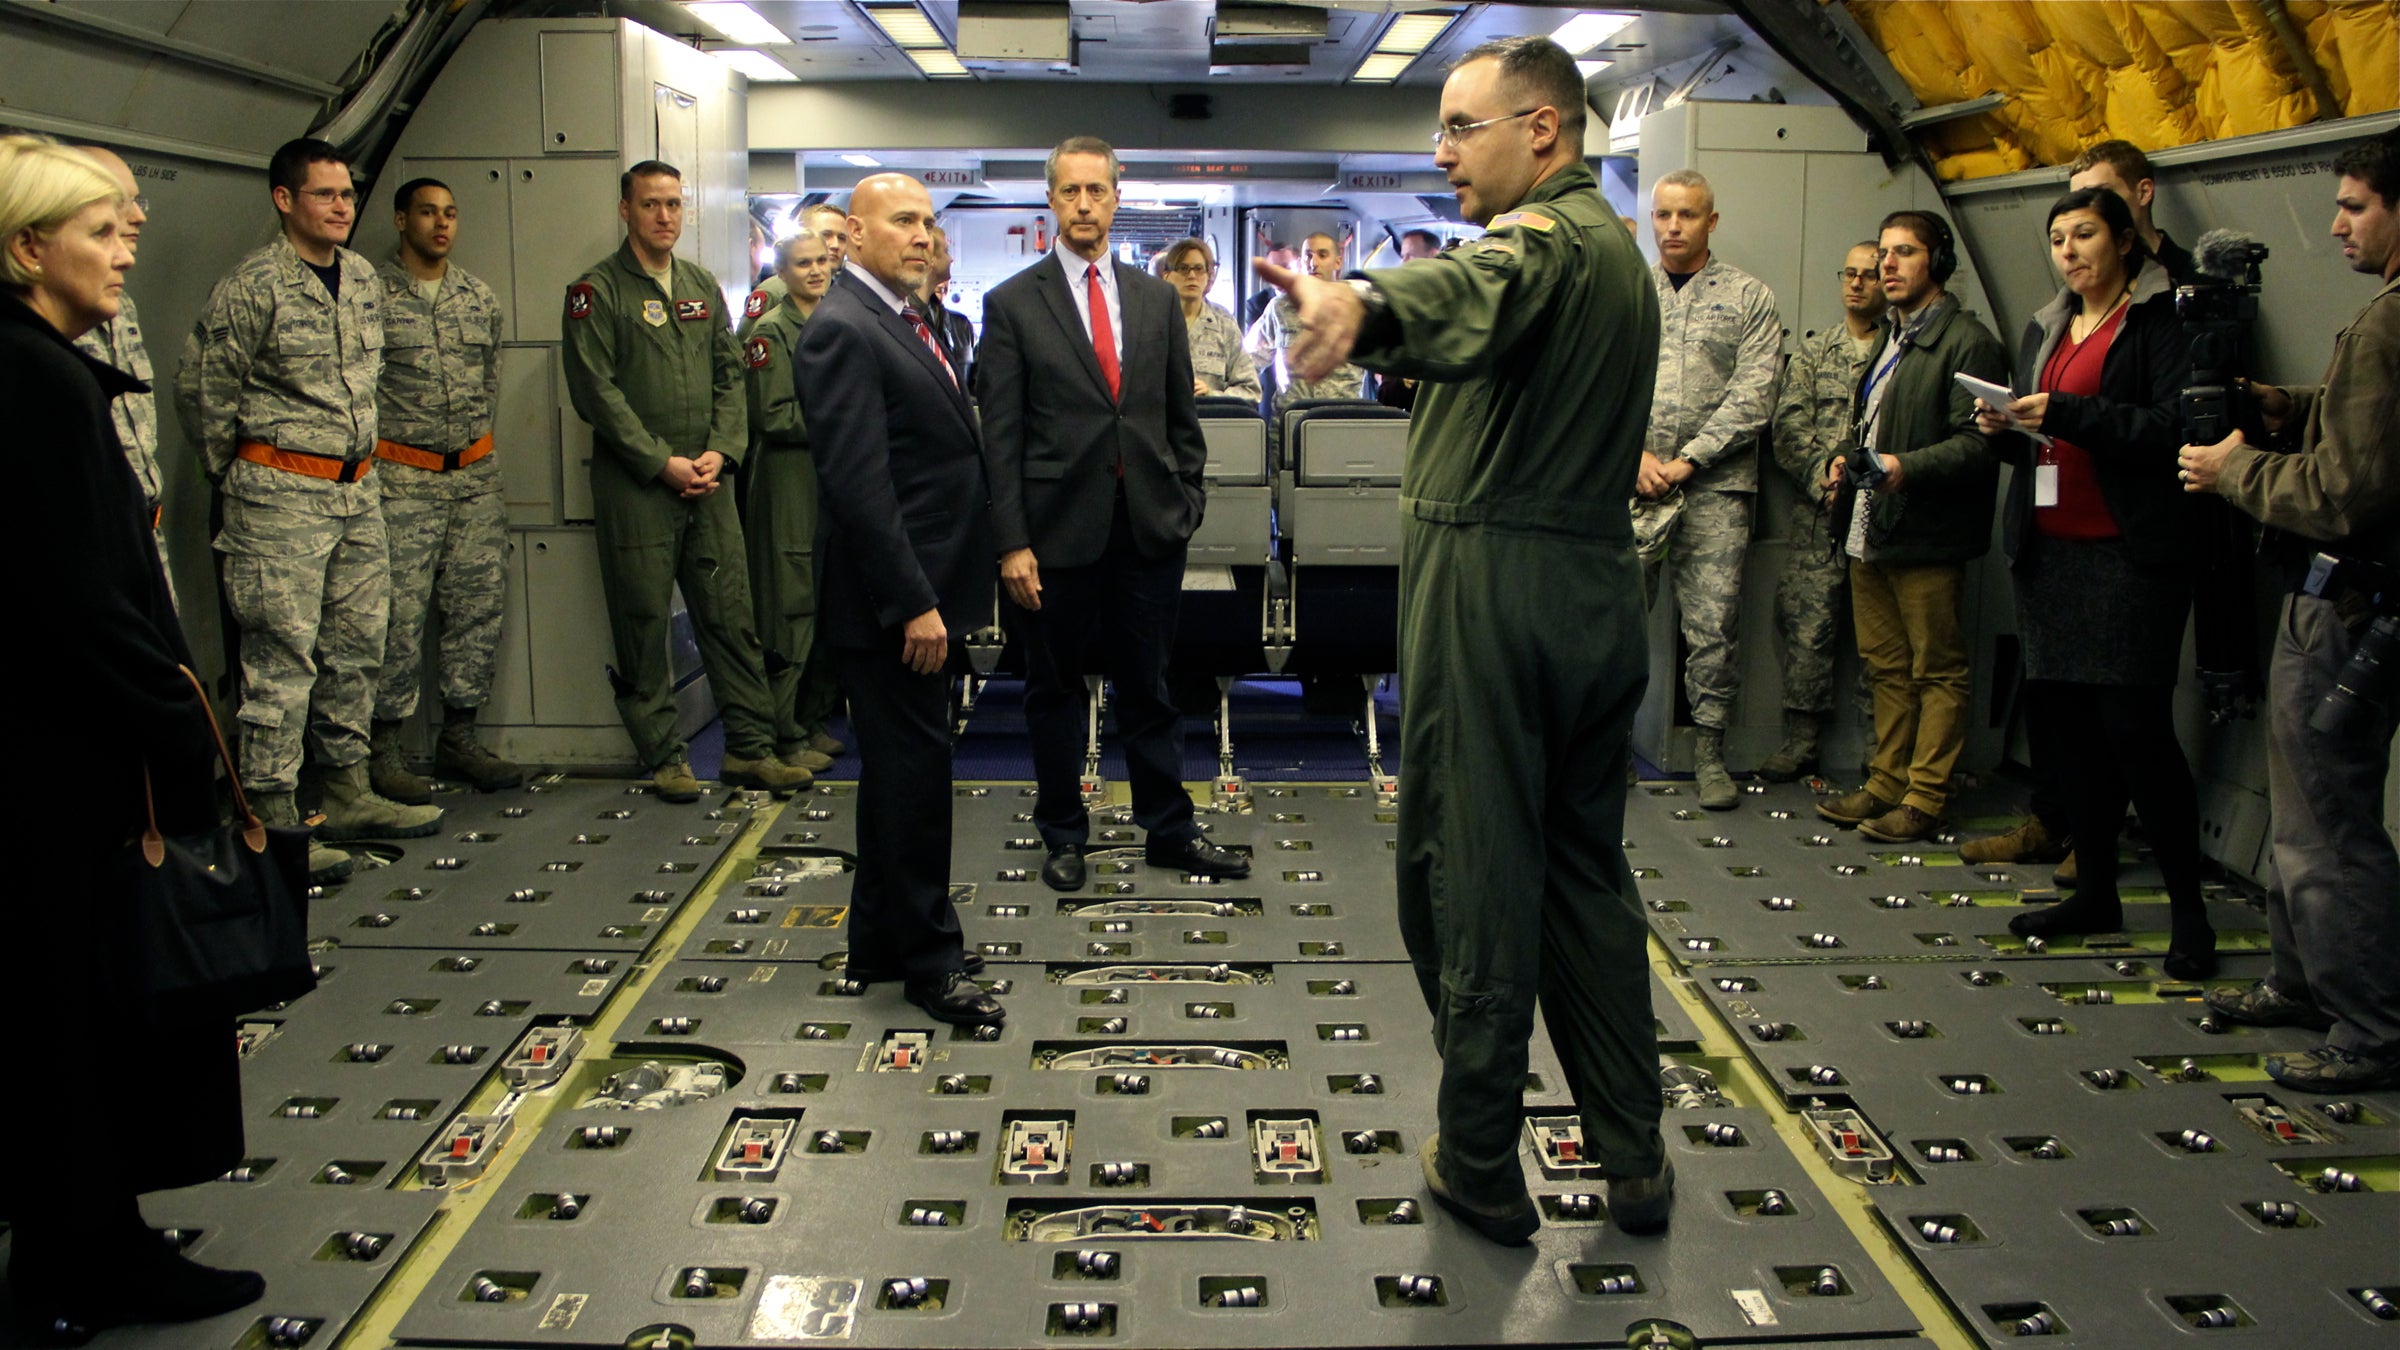  U.S. Rep. Tom MacArthur (center left) and U.S. Rep. Mac Thornberry (center), chairman of the Armed Services Committee,  tour a KC-10 aerial refueling plane at Joint Base McGuire-Dix-Lakehurst. (Emma Lee/WHYY) 